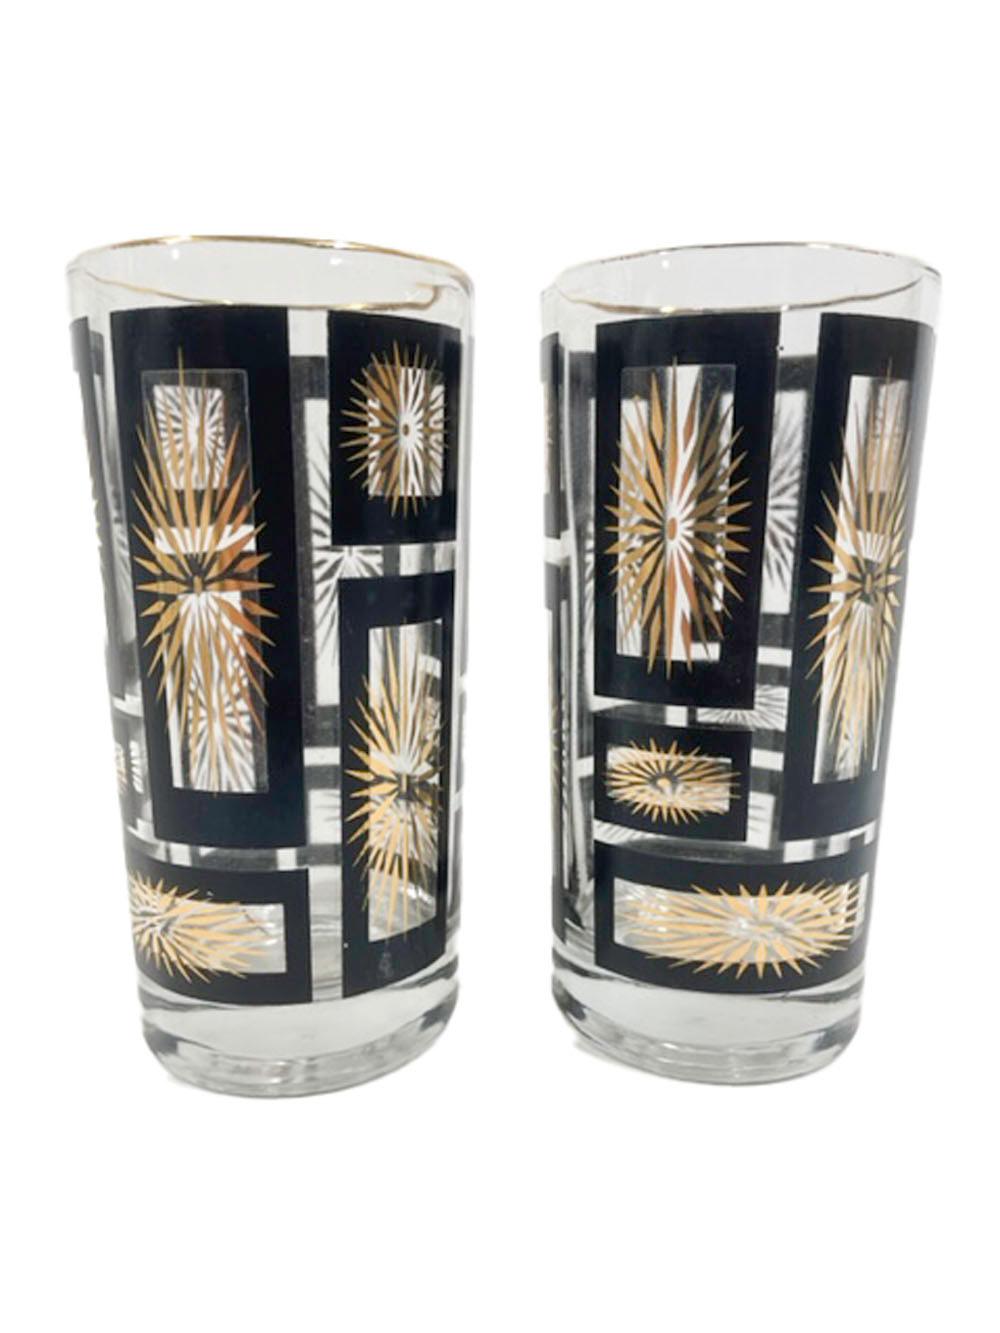 American Mid-Century Modern Atomic Period Highball Glasses with Gold Starbursts For Sale